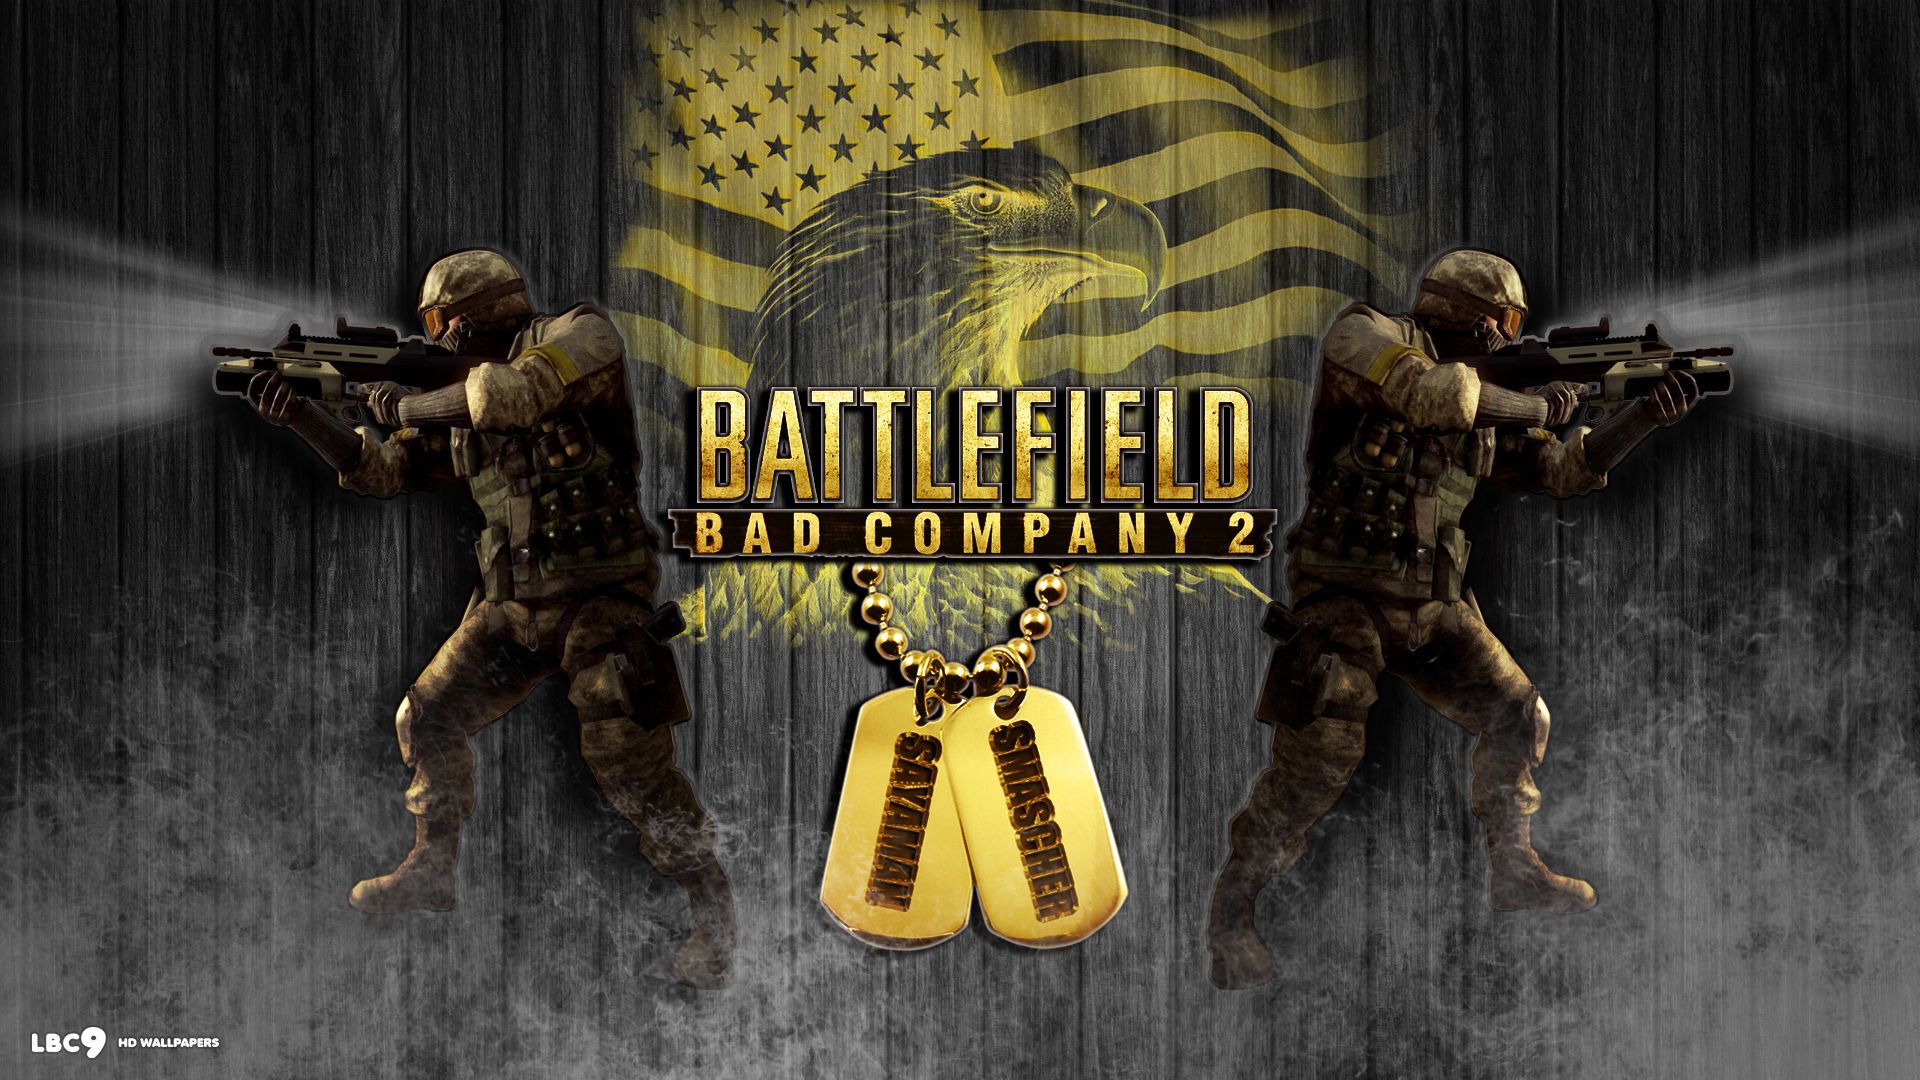 Free download Battlefield Bad Company 2 HD Wallpaper and Background Image [1920x1080] for your Desktop, Mobile & Tablet. Explore Company Wallpaper. Company Wallpaper, Wallpaper Company, National Wallpaper Company